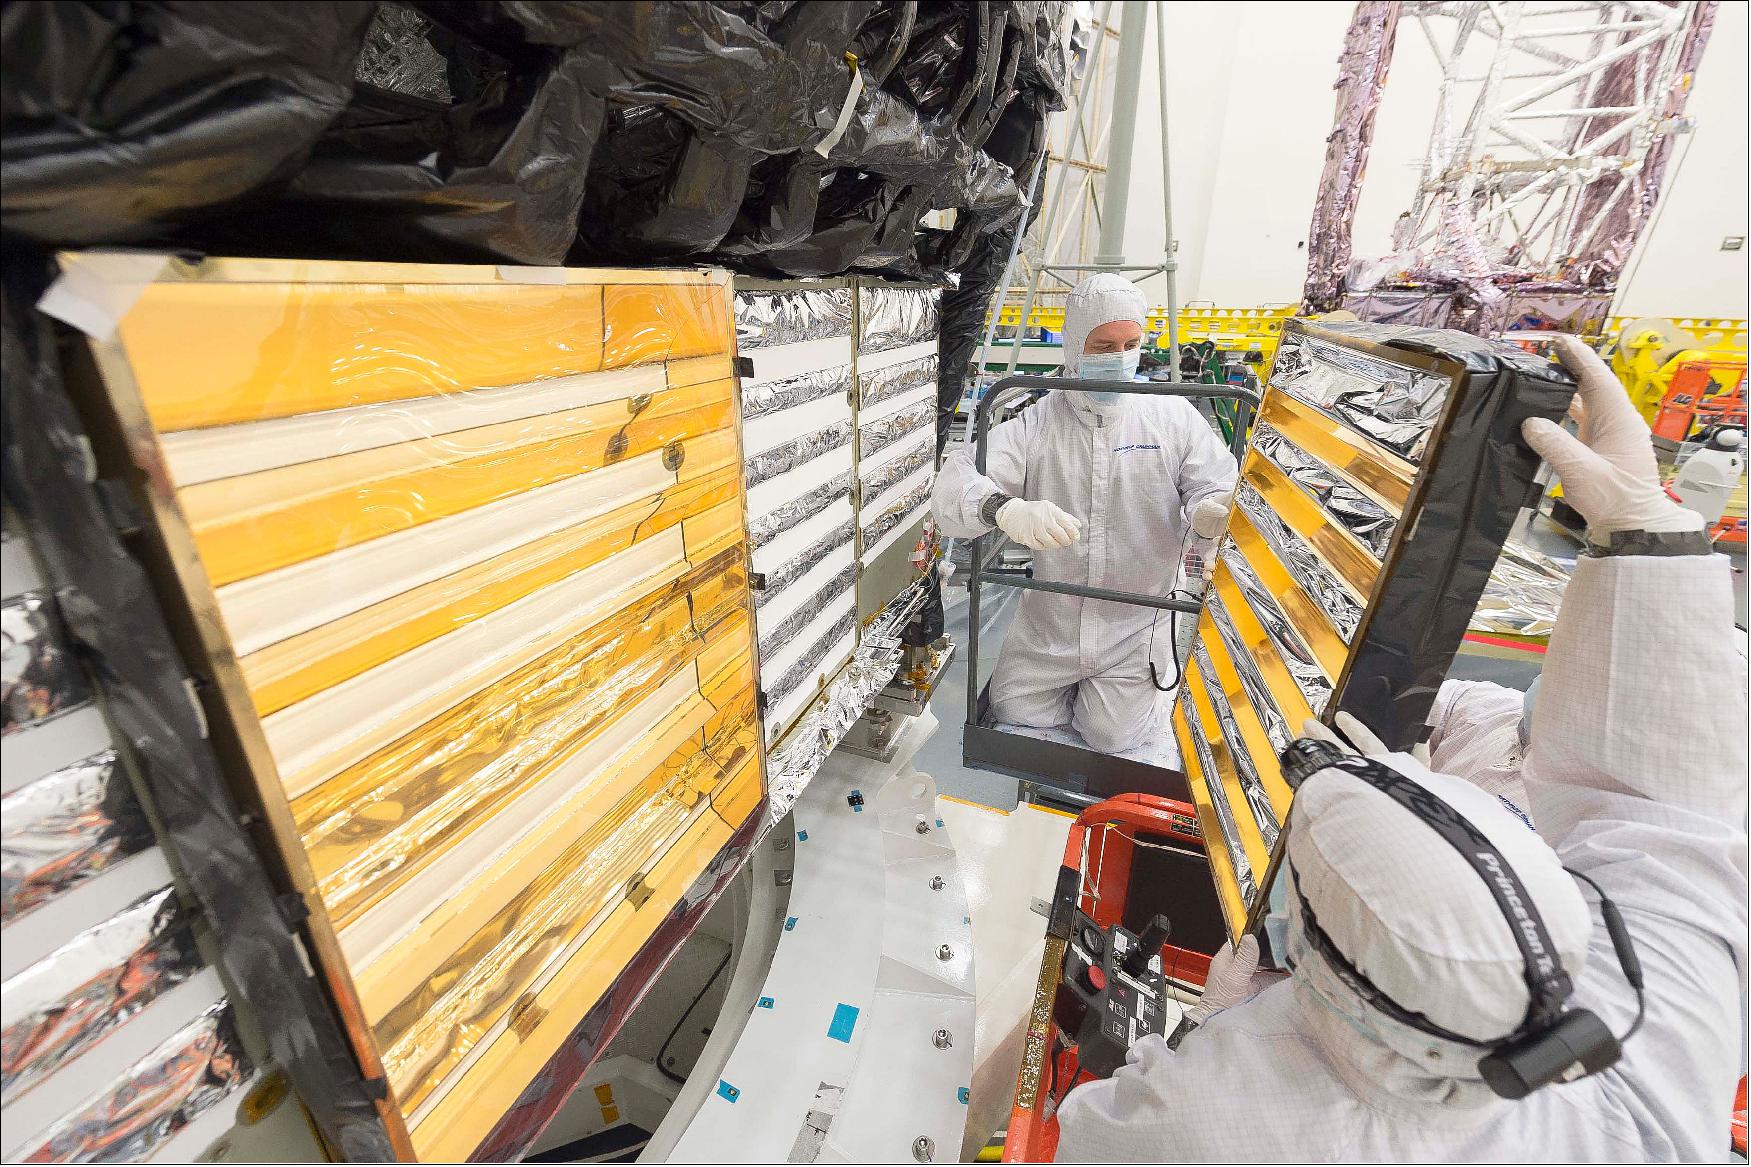 Figure 45: Engineers carefully hold onto a gold-plated baffle as they use a scissor lift to access the back of the integrated science instrument module (ISIM) of NASA's James Webb Space Telescope. They are in the process of reinstalling the baffles, which direct the heat generated by the instrument electronics safely into space and away from any cold areas of the infrared telescope (image credit: NASA/Chris Gunn)